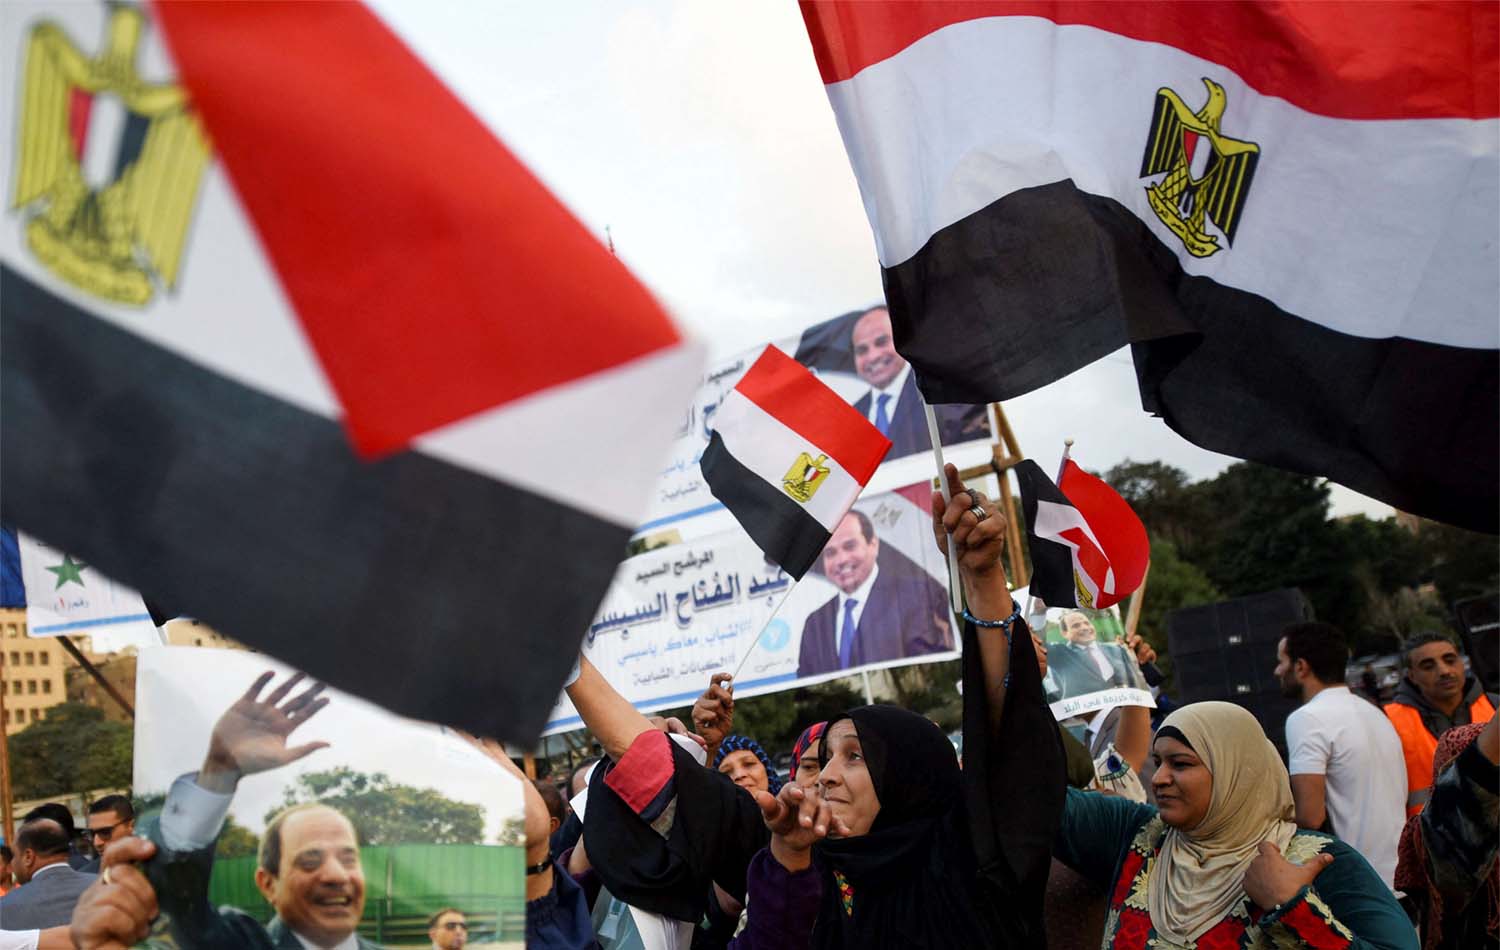 Sisi won 89.6% of the votes according to the National Election Authority